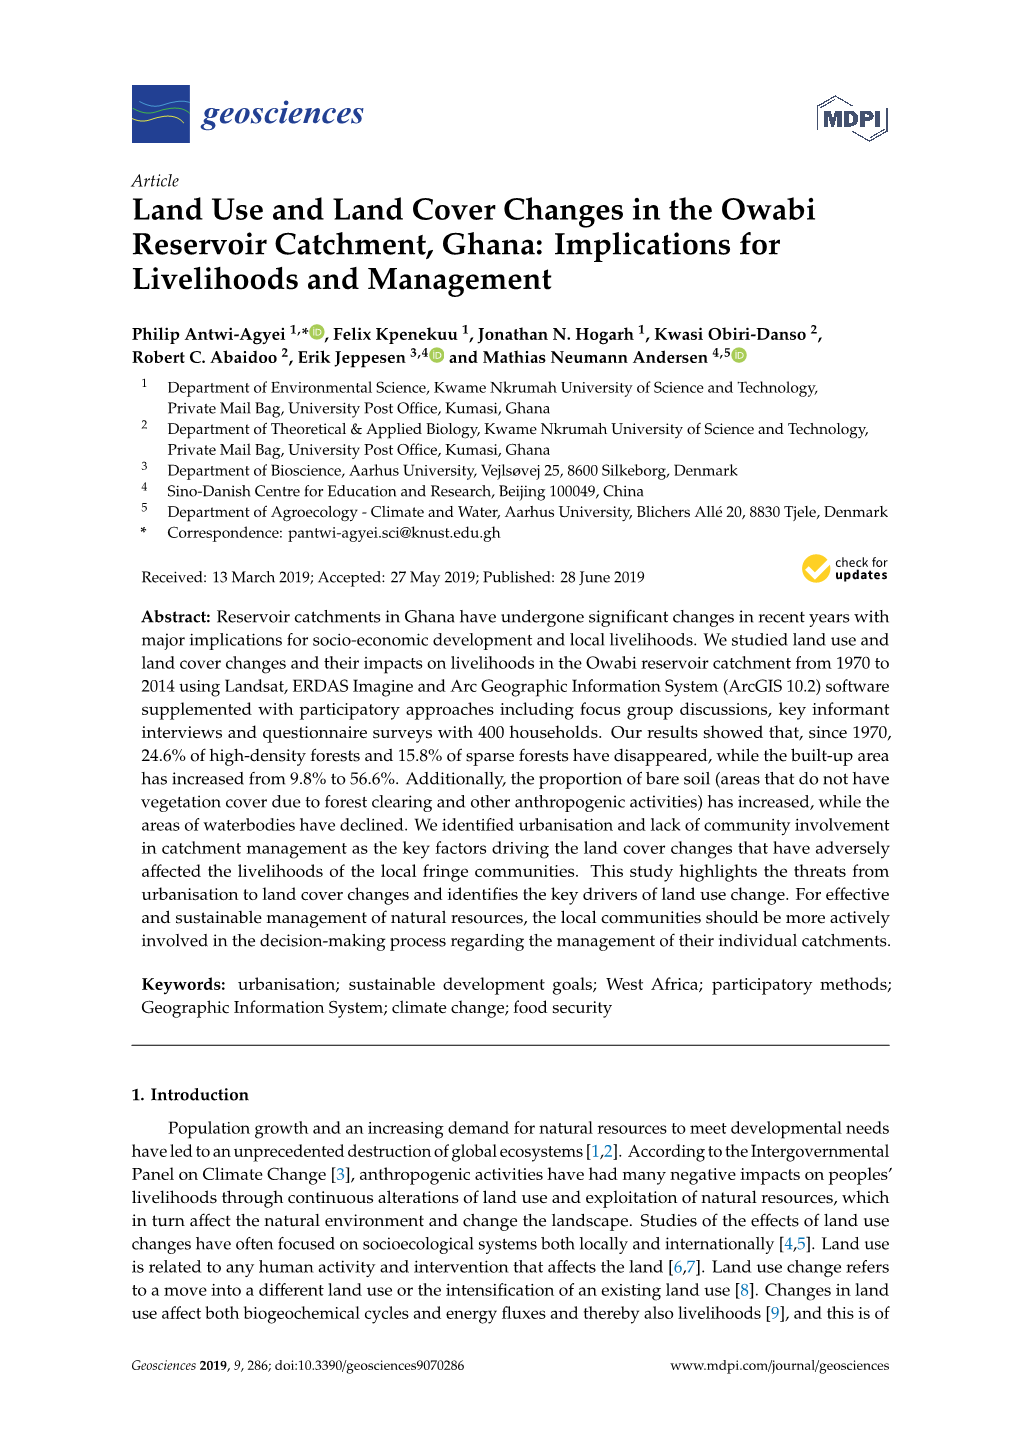 Land Use and Land Cover Changes in the Owabi Reservoir Catchment, Ghana: Implications for Livelihoods and Management